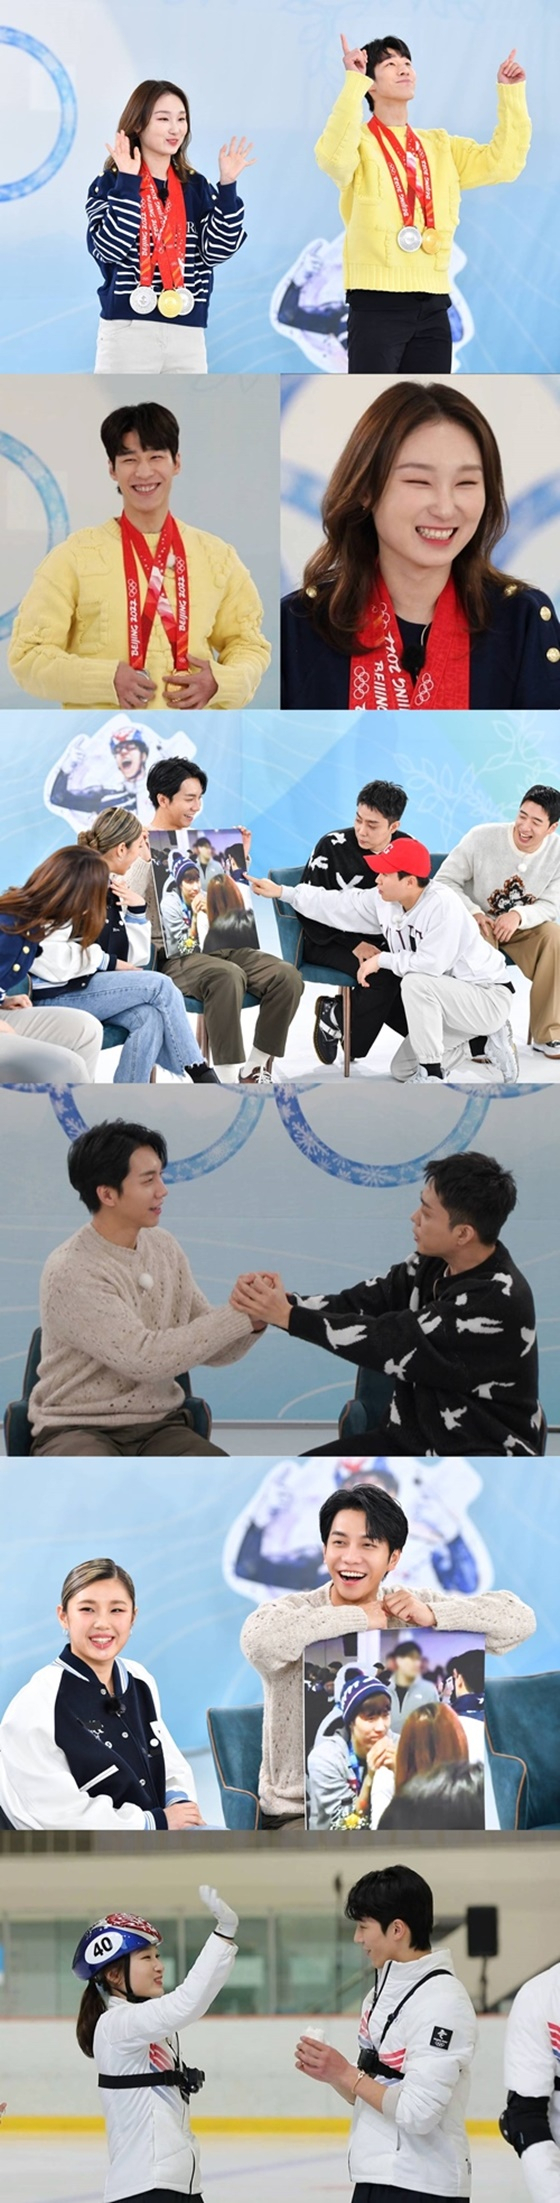 Hwang Dae-heon and Choi Min-jung, the gold medalists of the Beijing Winter Olympics, will appear for the first time in the SBS entertainment program All The Butlers broadcasted at 6:30 pm on the 6th.Hwang Dae-heon and Choi Min-jung were suspected of being in a relationship between some netizens with a conversation with each other by holding each others hands.The two masters, who have already attracted a lot of attention with the preliminary video released on the 27th, will show off the charm of the reverse that is 180 degrees different from the appearance on the ice, from the Olympic behind-the-scenes story to the truth of the heat that made the Republic of Korea hot.The two of them also had a pink atmosphere during the recent All The Butlers filming, which made the members feel nervous and suspicious.In the meantime, Hwang Dae-heons sudden heartbeat toward Choi Min-jung turned upside down.I wonder what the truth of the romance that Hwang Dae-heon and Choi Min-jung confessed is.On the other hand, Hwang Dae-heon challenged the high-level short track confrontation with Eun Ji-won and Lee Jung, who appeared as daily disciples with the members.Hwang Dae-heon, who was confident of winning, said that he was embarrassed by the unexpected skating ability of the members when the confrontation began.